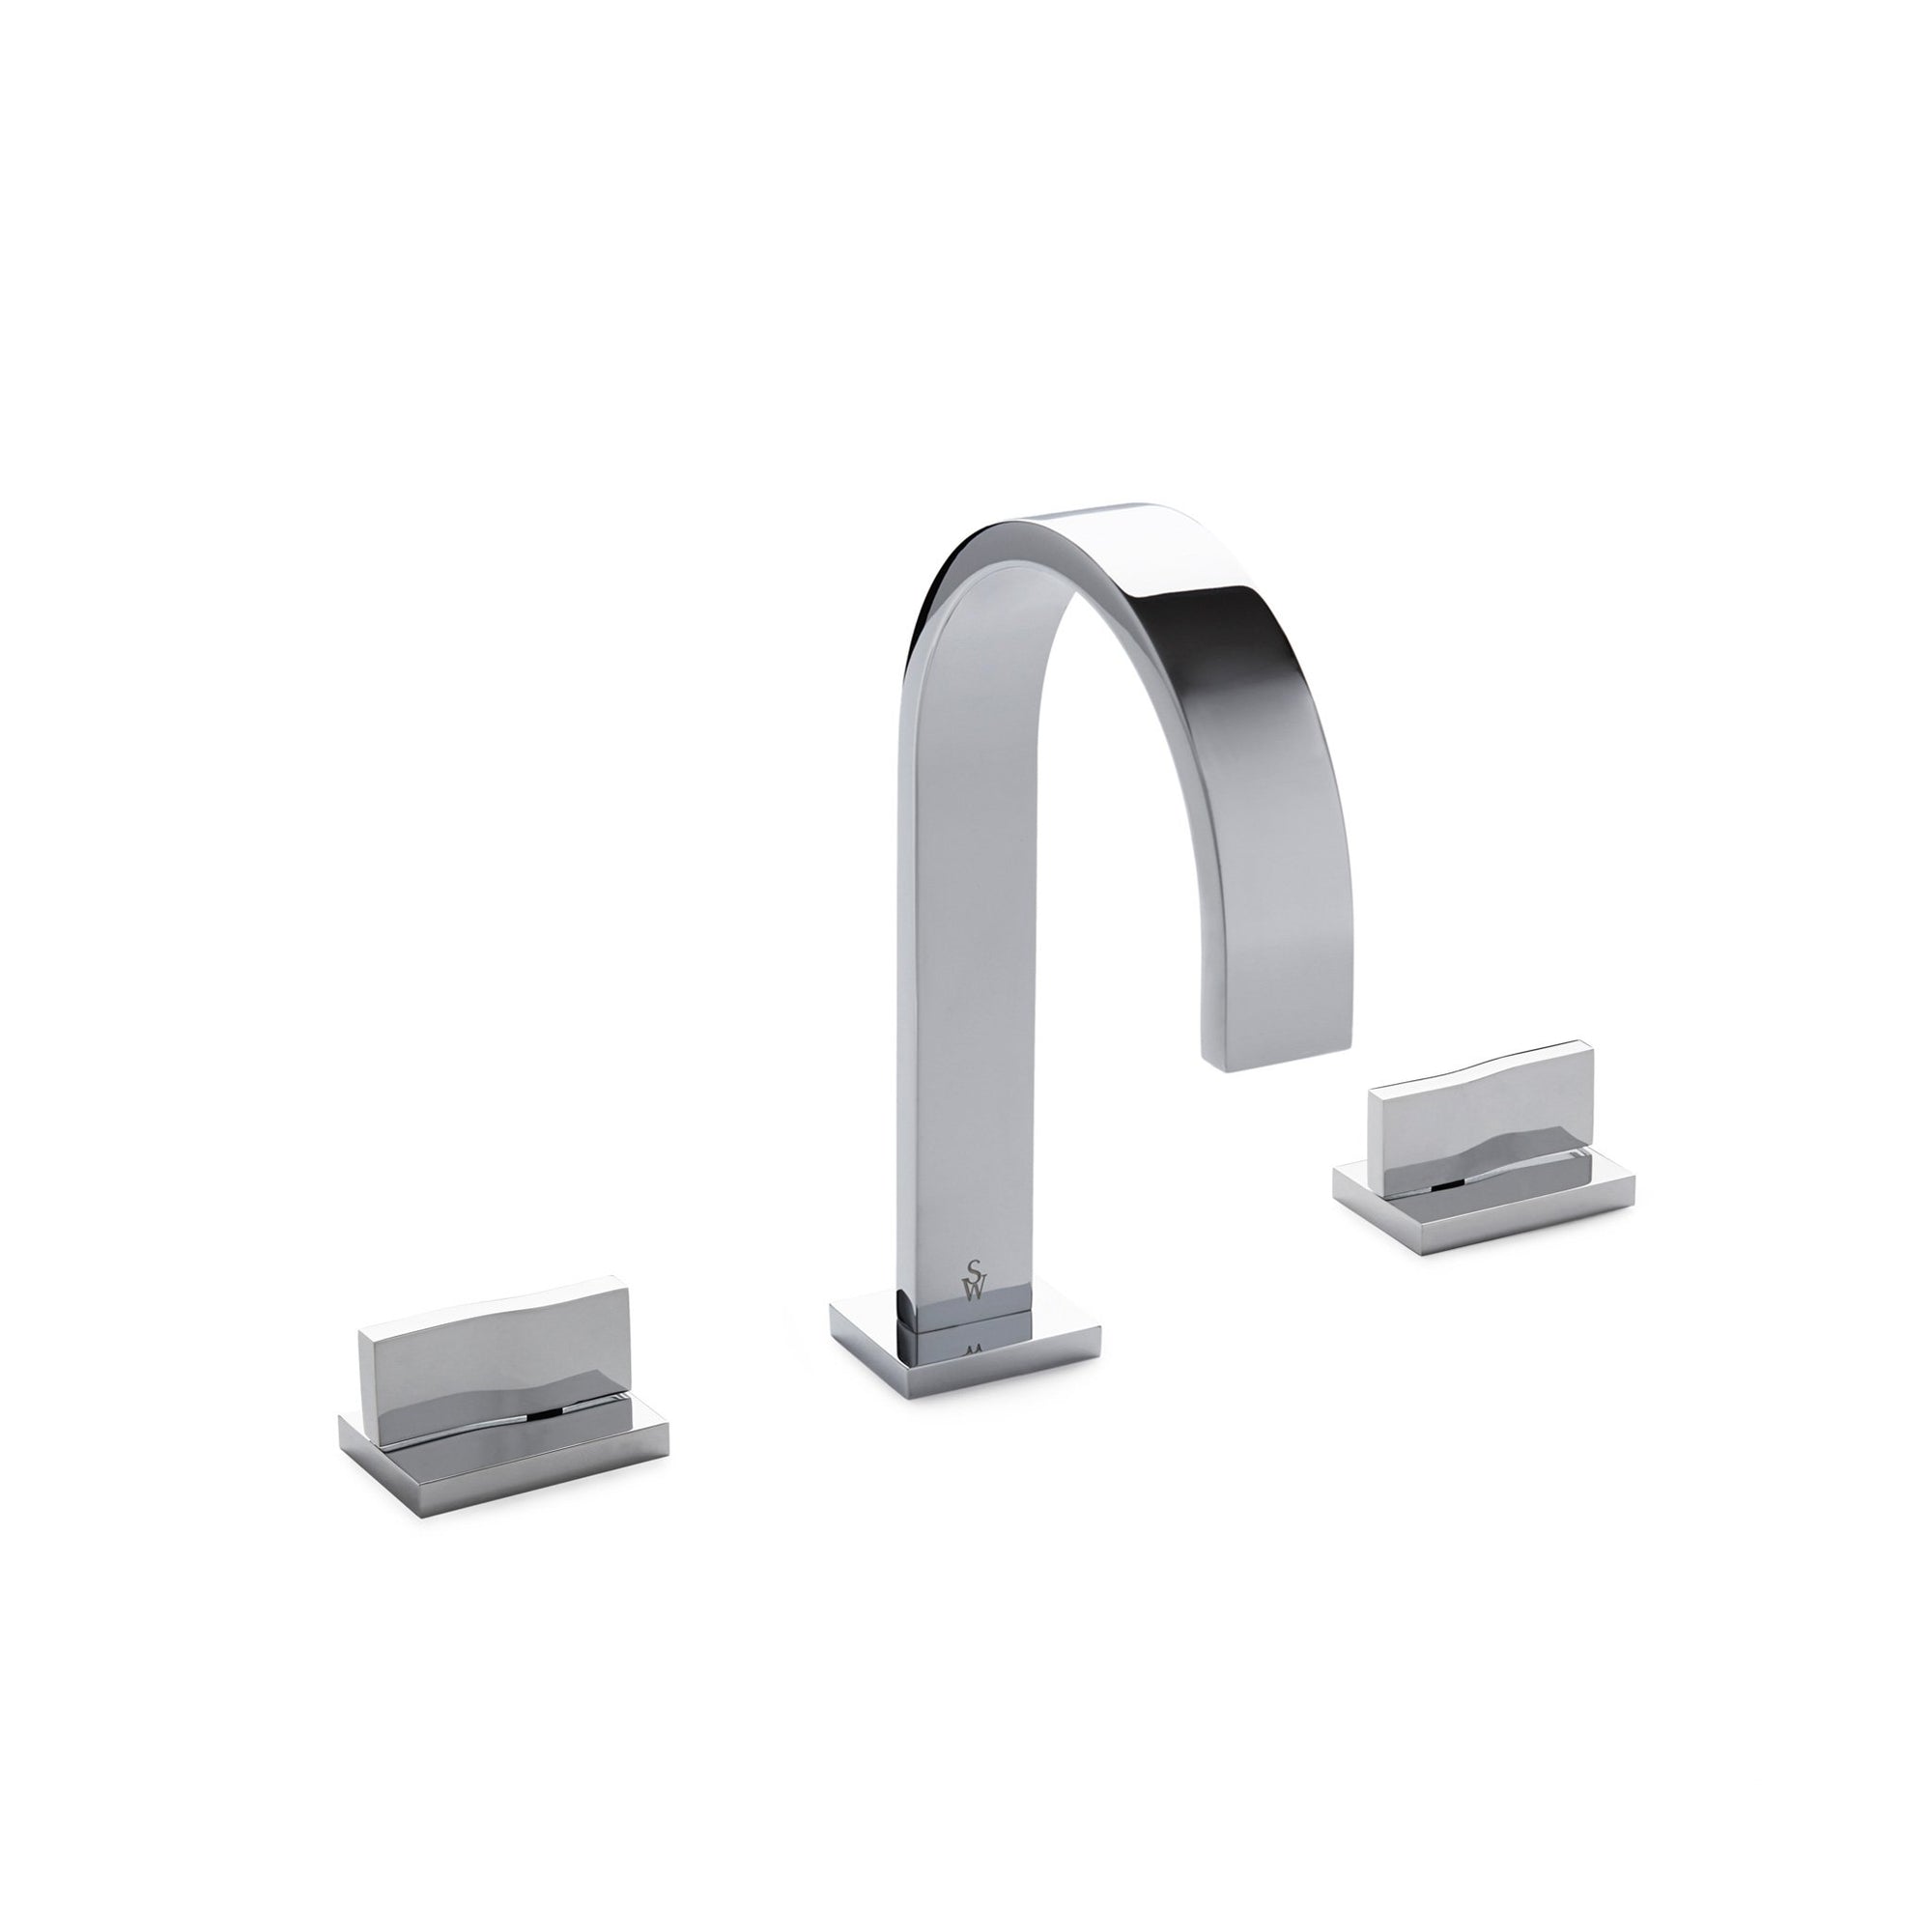 002BSN101-CP Sherle Wagner International Arbor with Ripple Lever Faucet Set in Polished Chrome metal finish